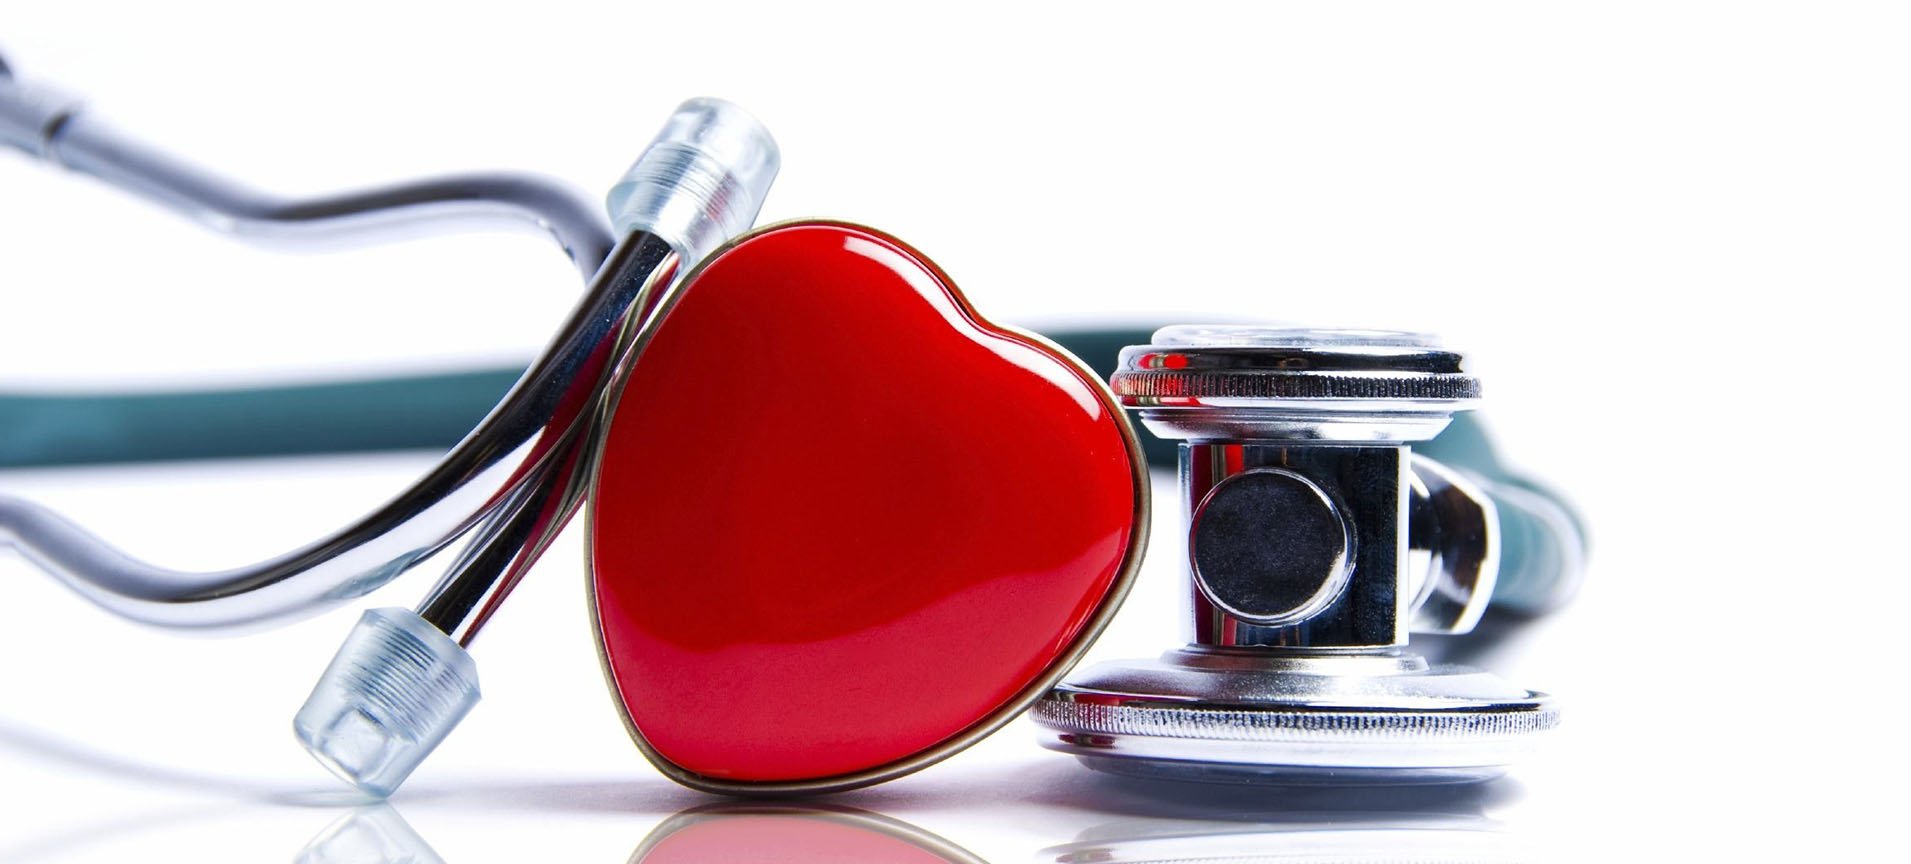 Stethoscope and a heart